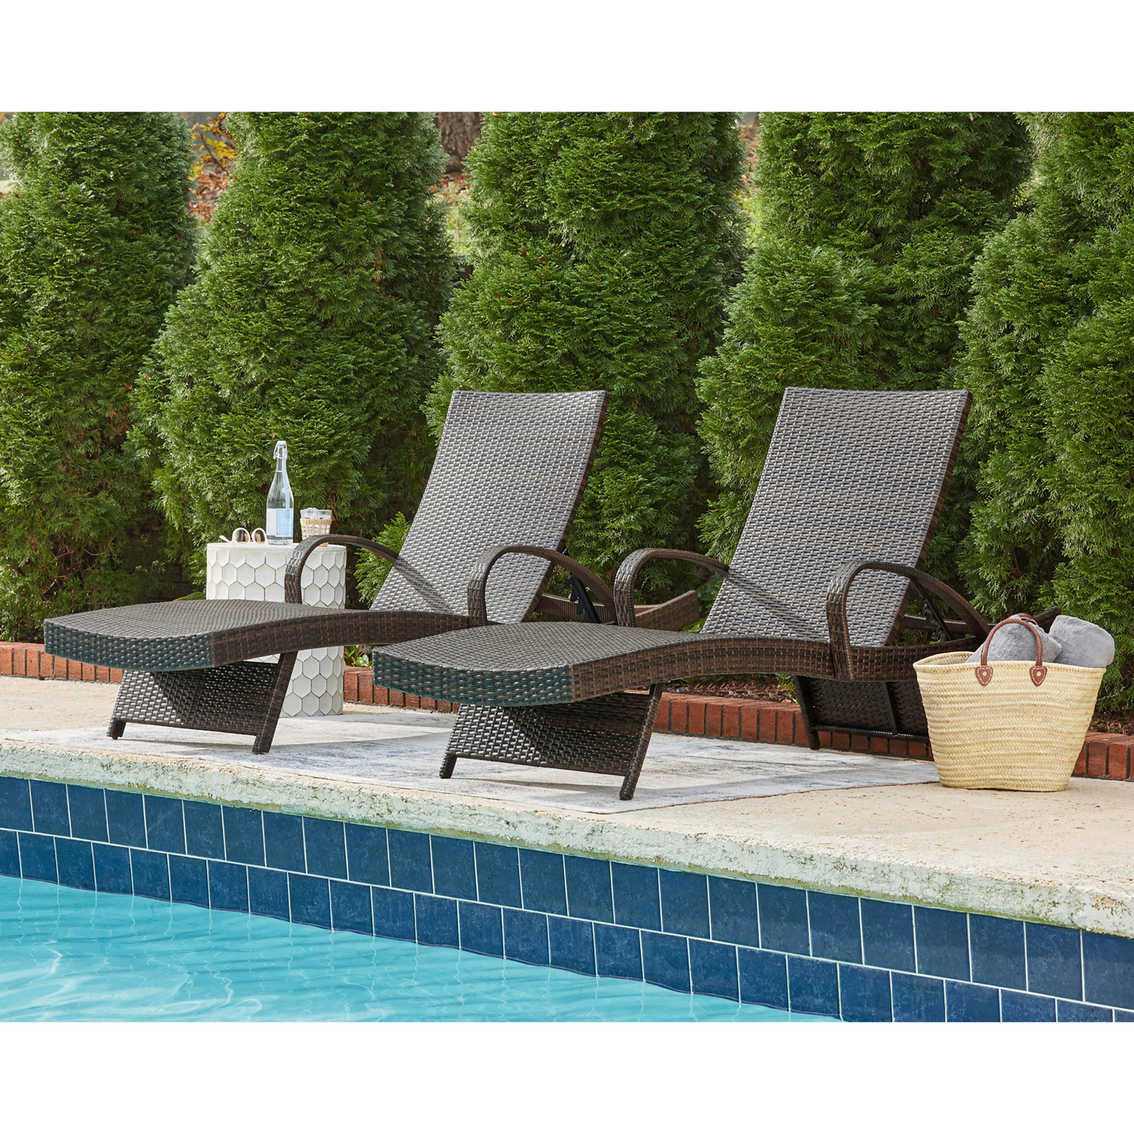 Signature Design by Ashley Kantana Outdoor Chaise Lounge 2 pk. - Image 2 of 6